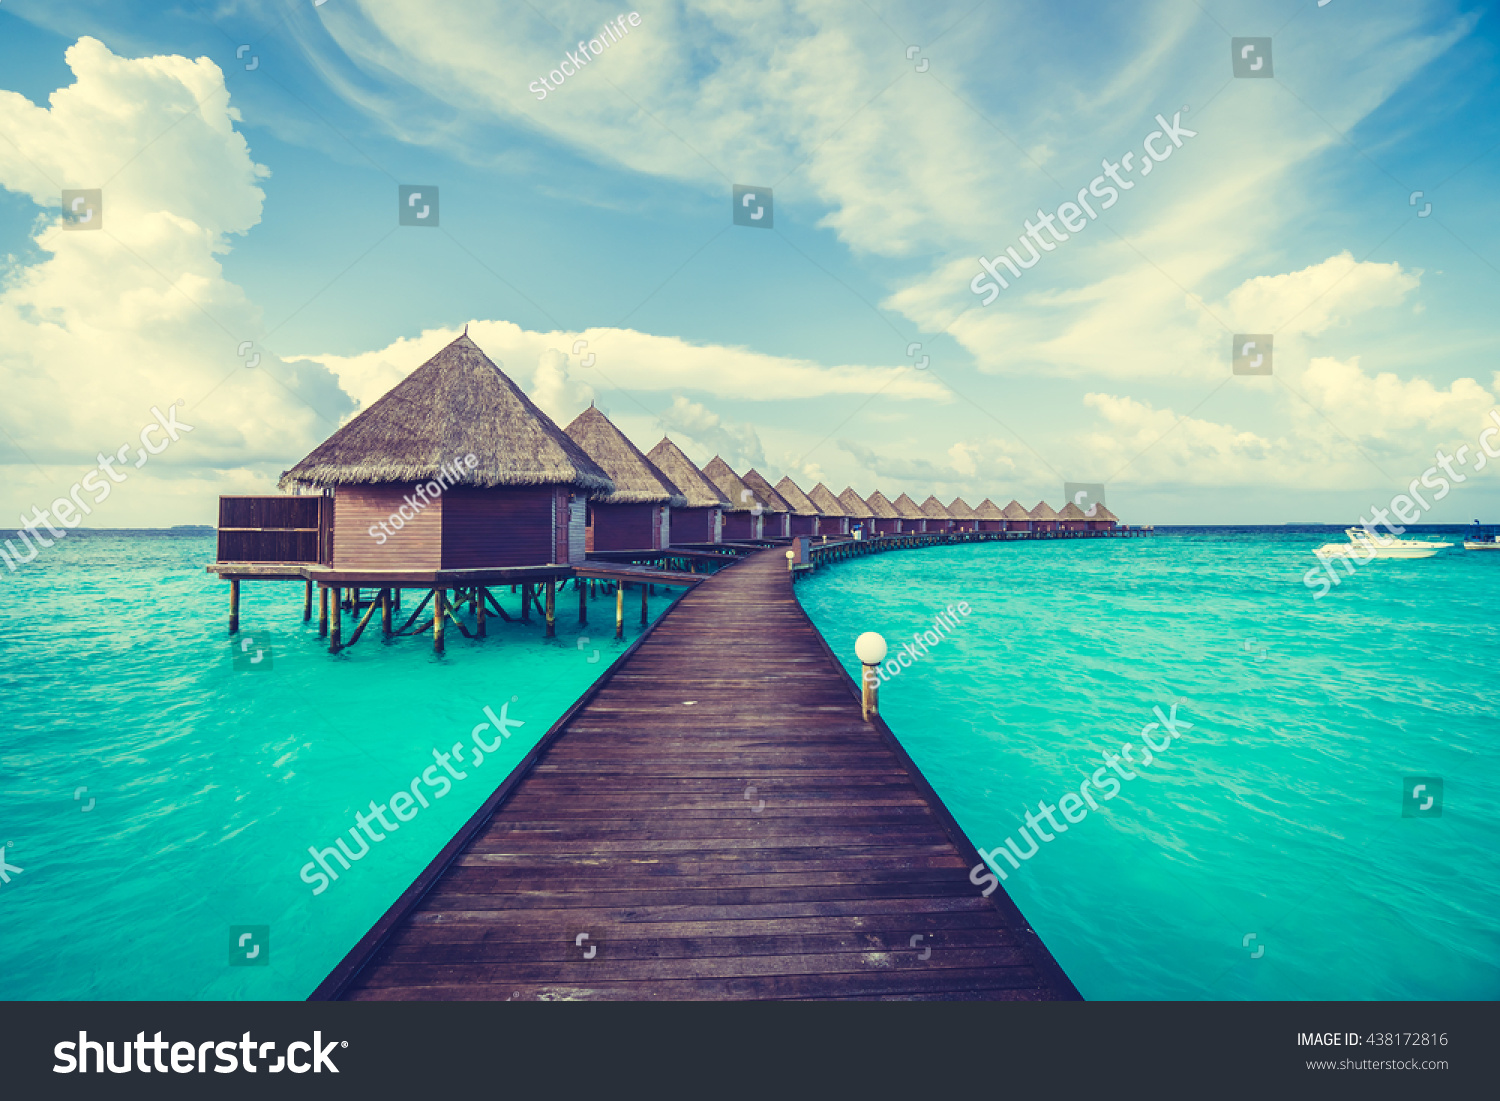 stock-photo-beautiful-tropical-maldives-resort-hotel-and-island-with-beach-and-sea-on-sky-for-holiday-vacation-438172816.jpg